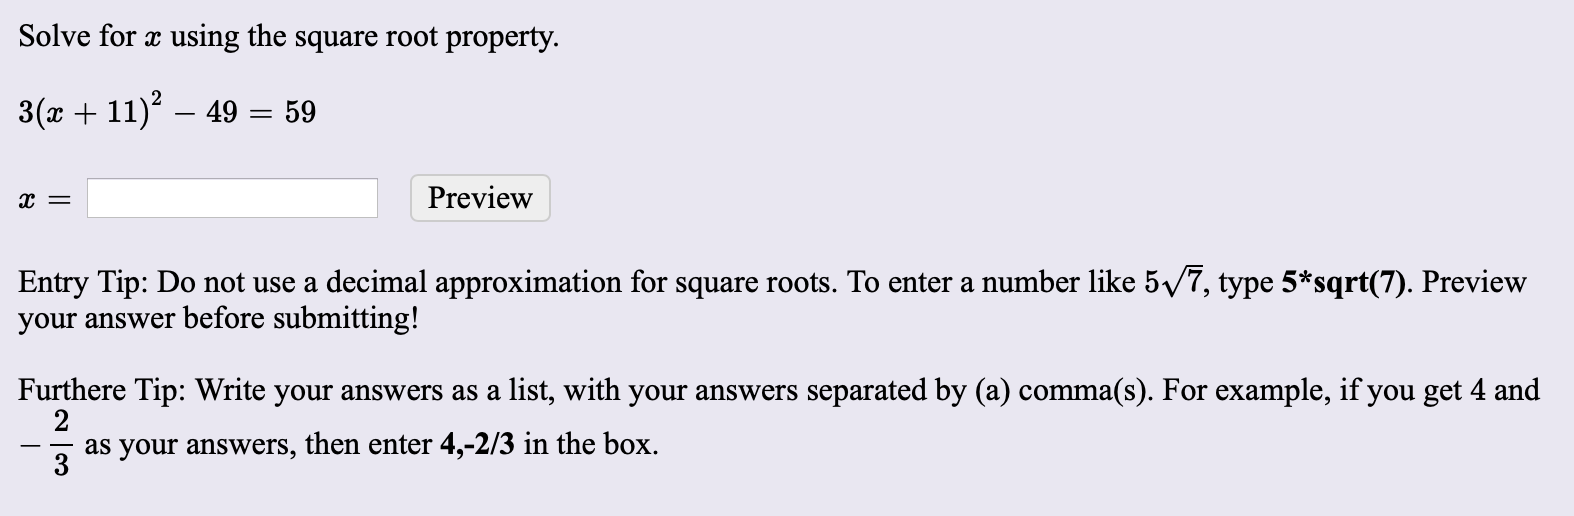 Solve for x using the square root property.
3(x + 11) – 49 = 59
Preview
Entry Tip: Do not use a decimal approximation for square roots. To enter a number like 5/7, type 5*sqrt(7). Preview
your answer before submitting!
Furthere Tip: Write your answers as a list, with your answers separated by (a) comma(s). For example, if you get 4 and
2
as your answers, then enter 4,-2/3 in the box.
3
